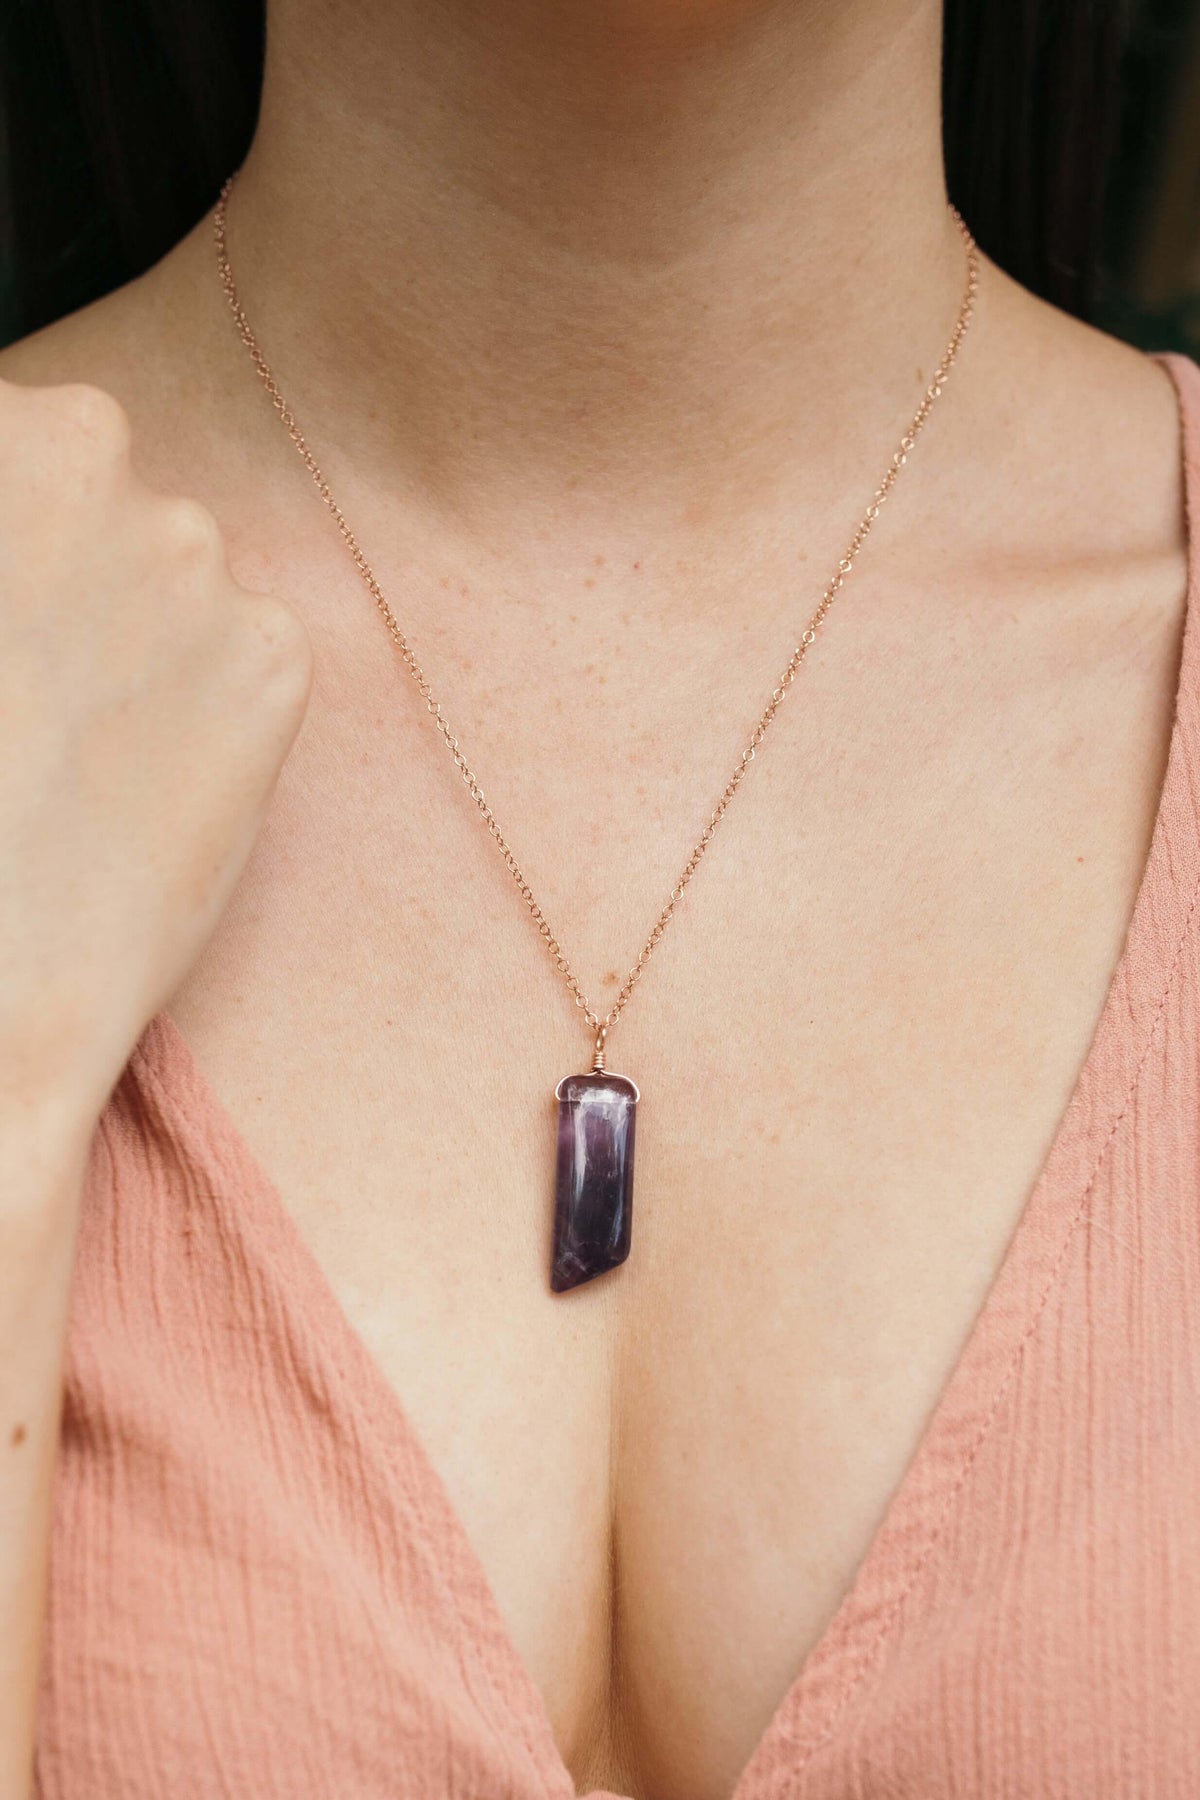 Smooth Point Pendant Necklace - Amethyst - 14K Rose Gold Fill - Luna Tide Handmade Jewellery